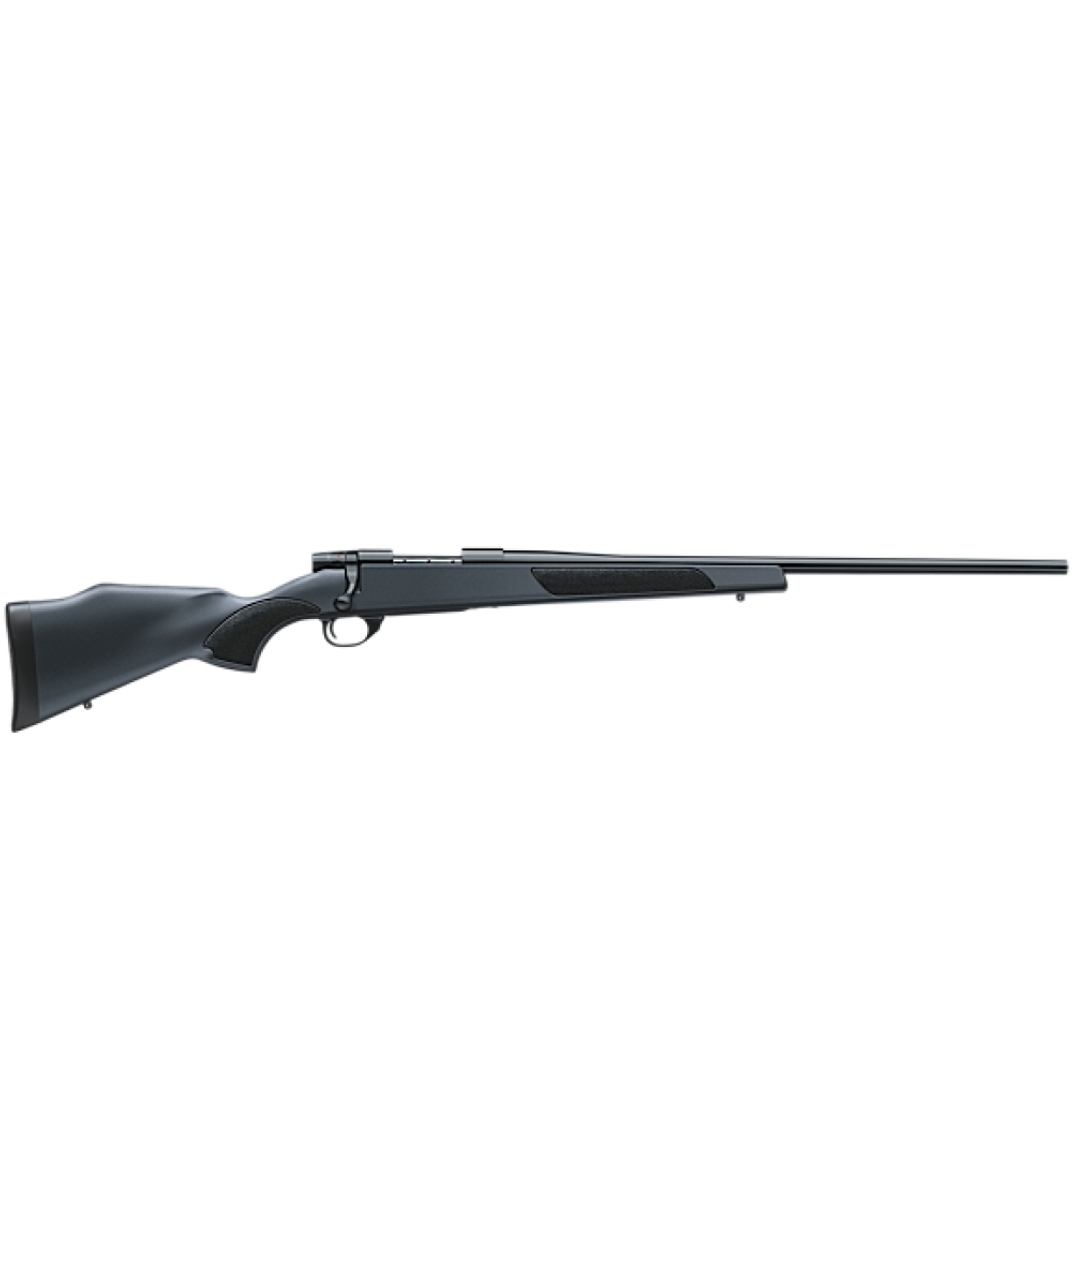 Weatherby Vanguard, 223 Rem, 24" Barrel, Synthetic Stock